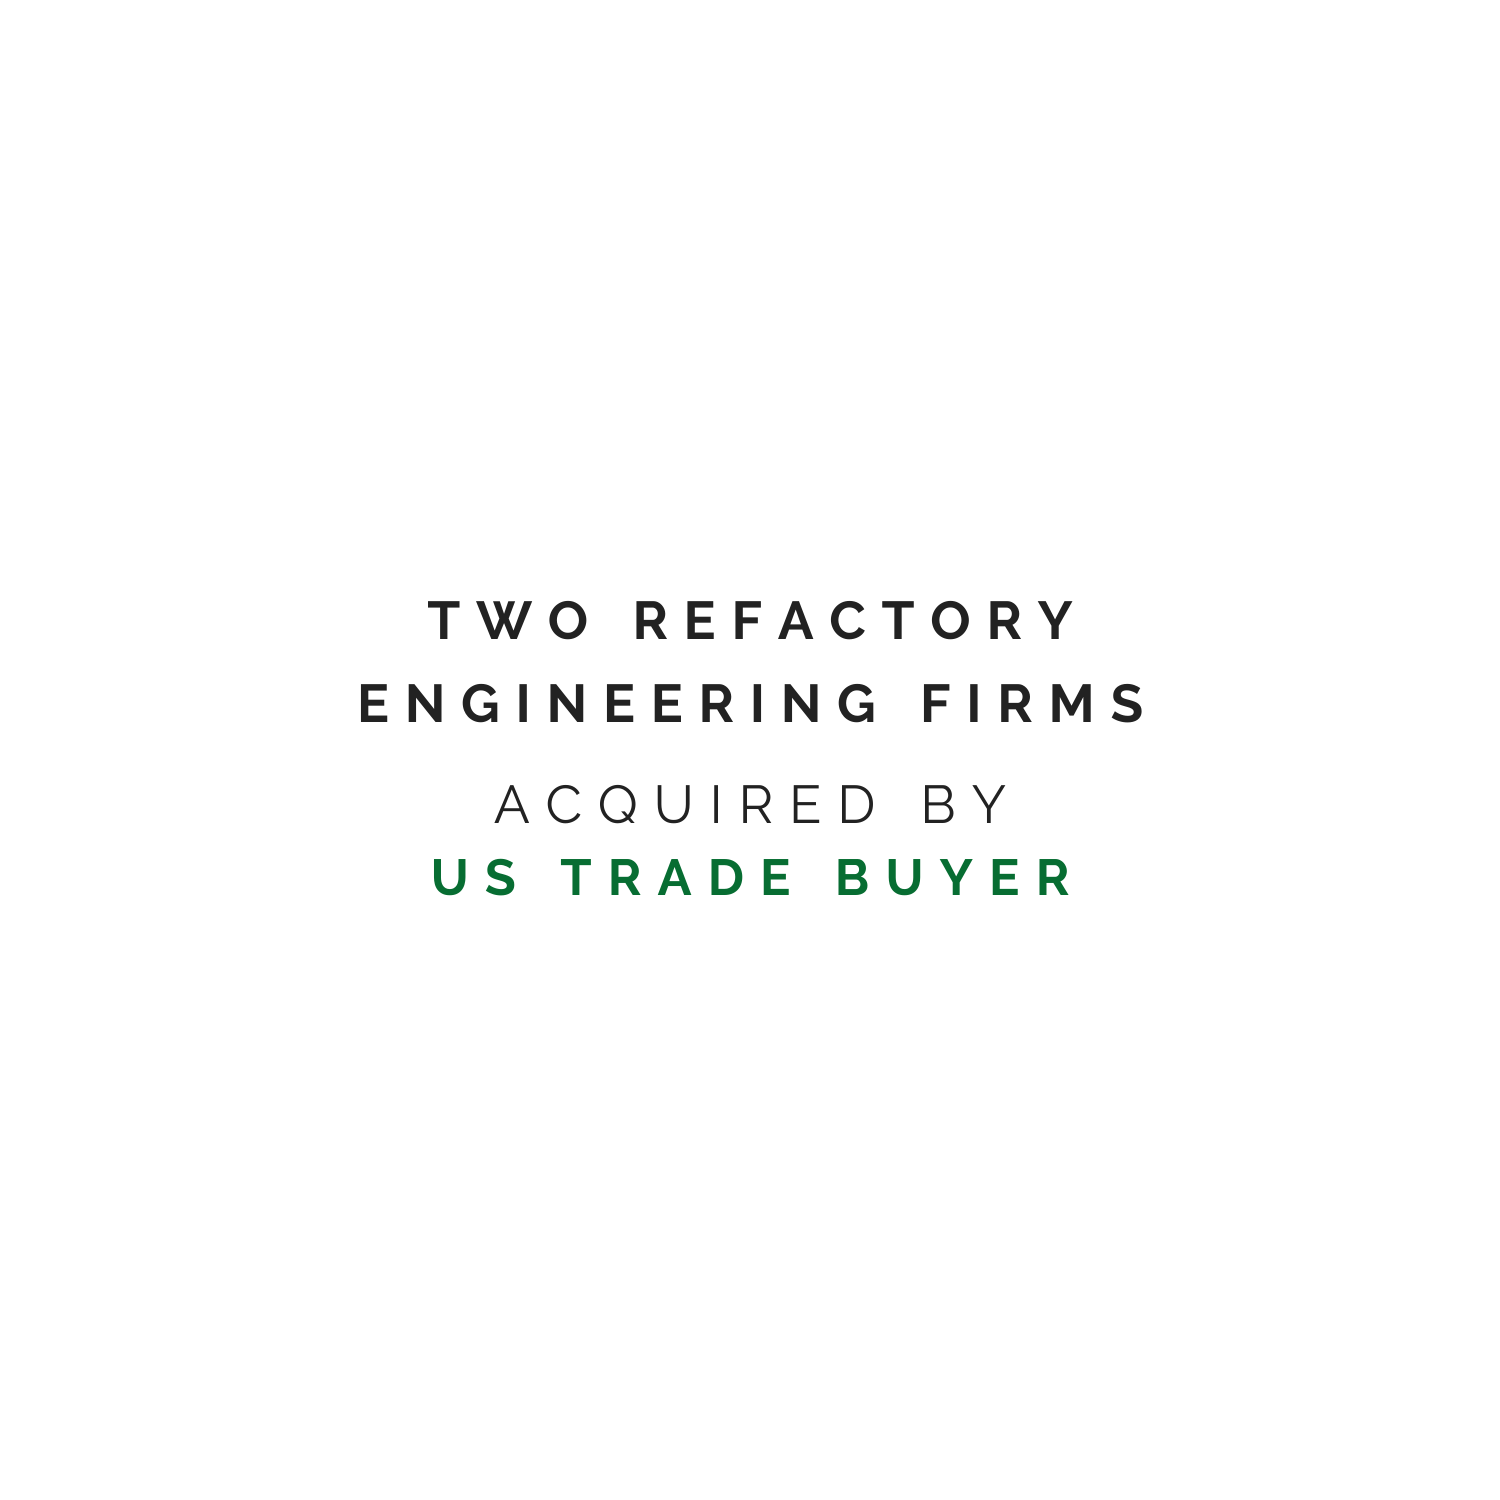 Acquisition of two Refactory Engineering Companies in Denmark, Europe